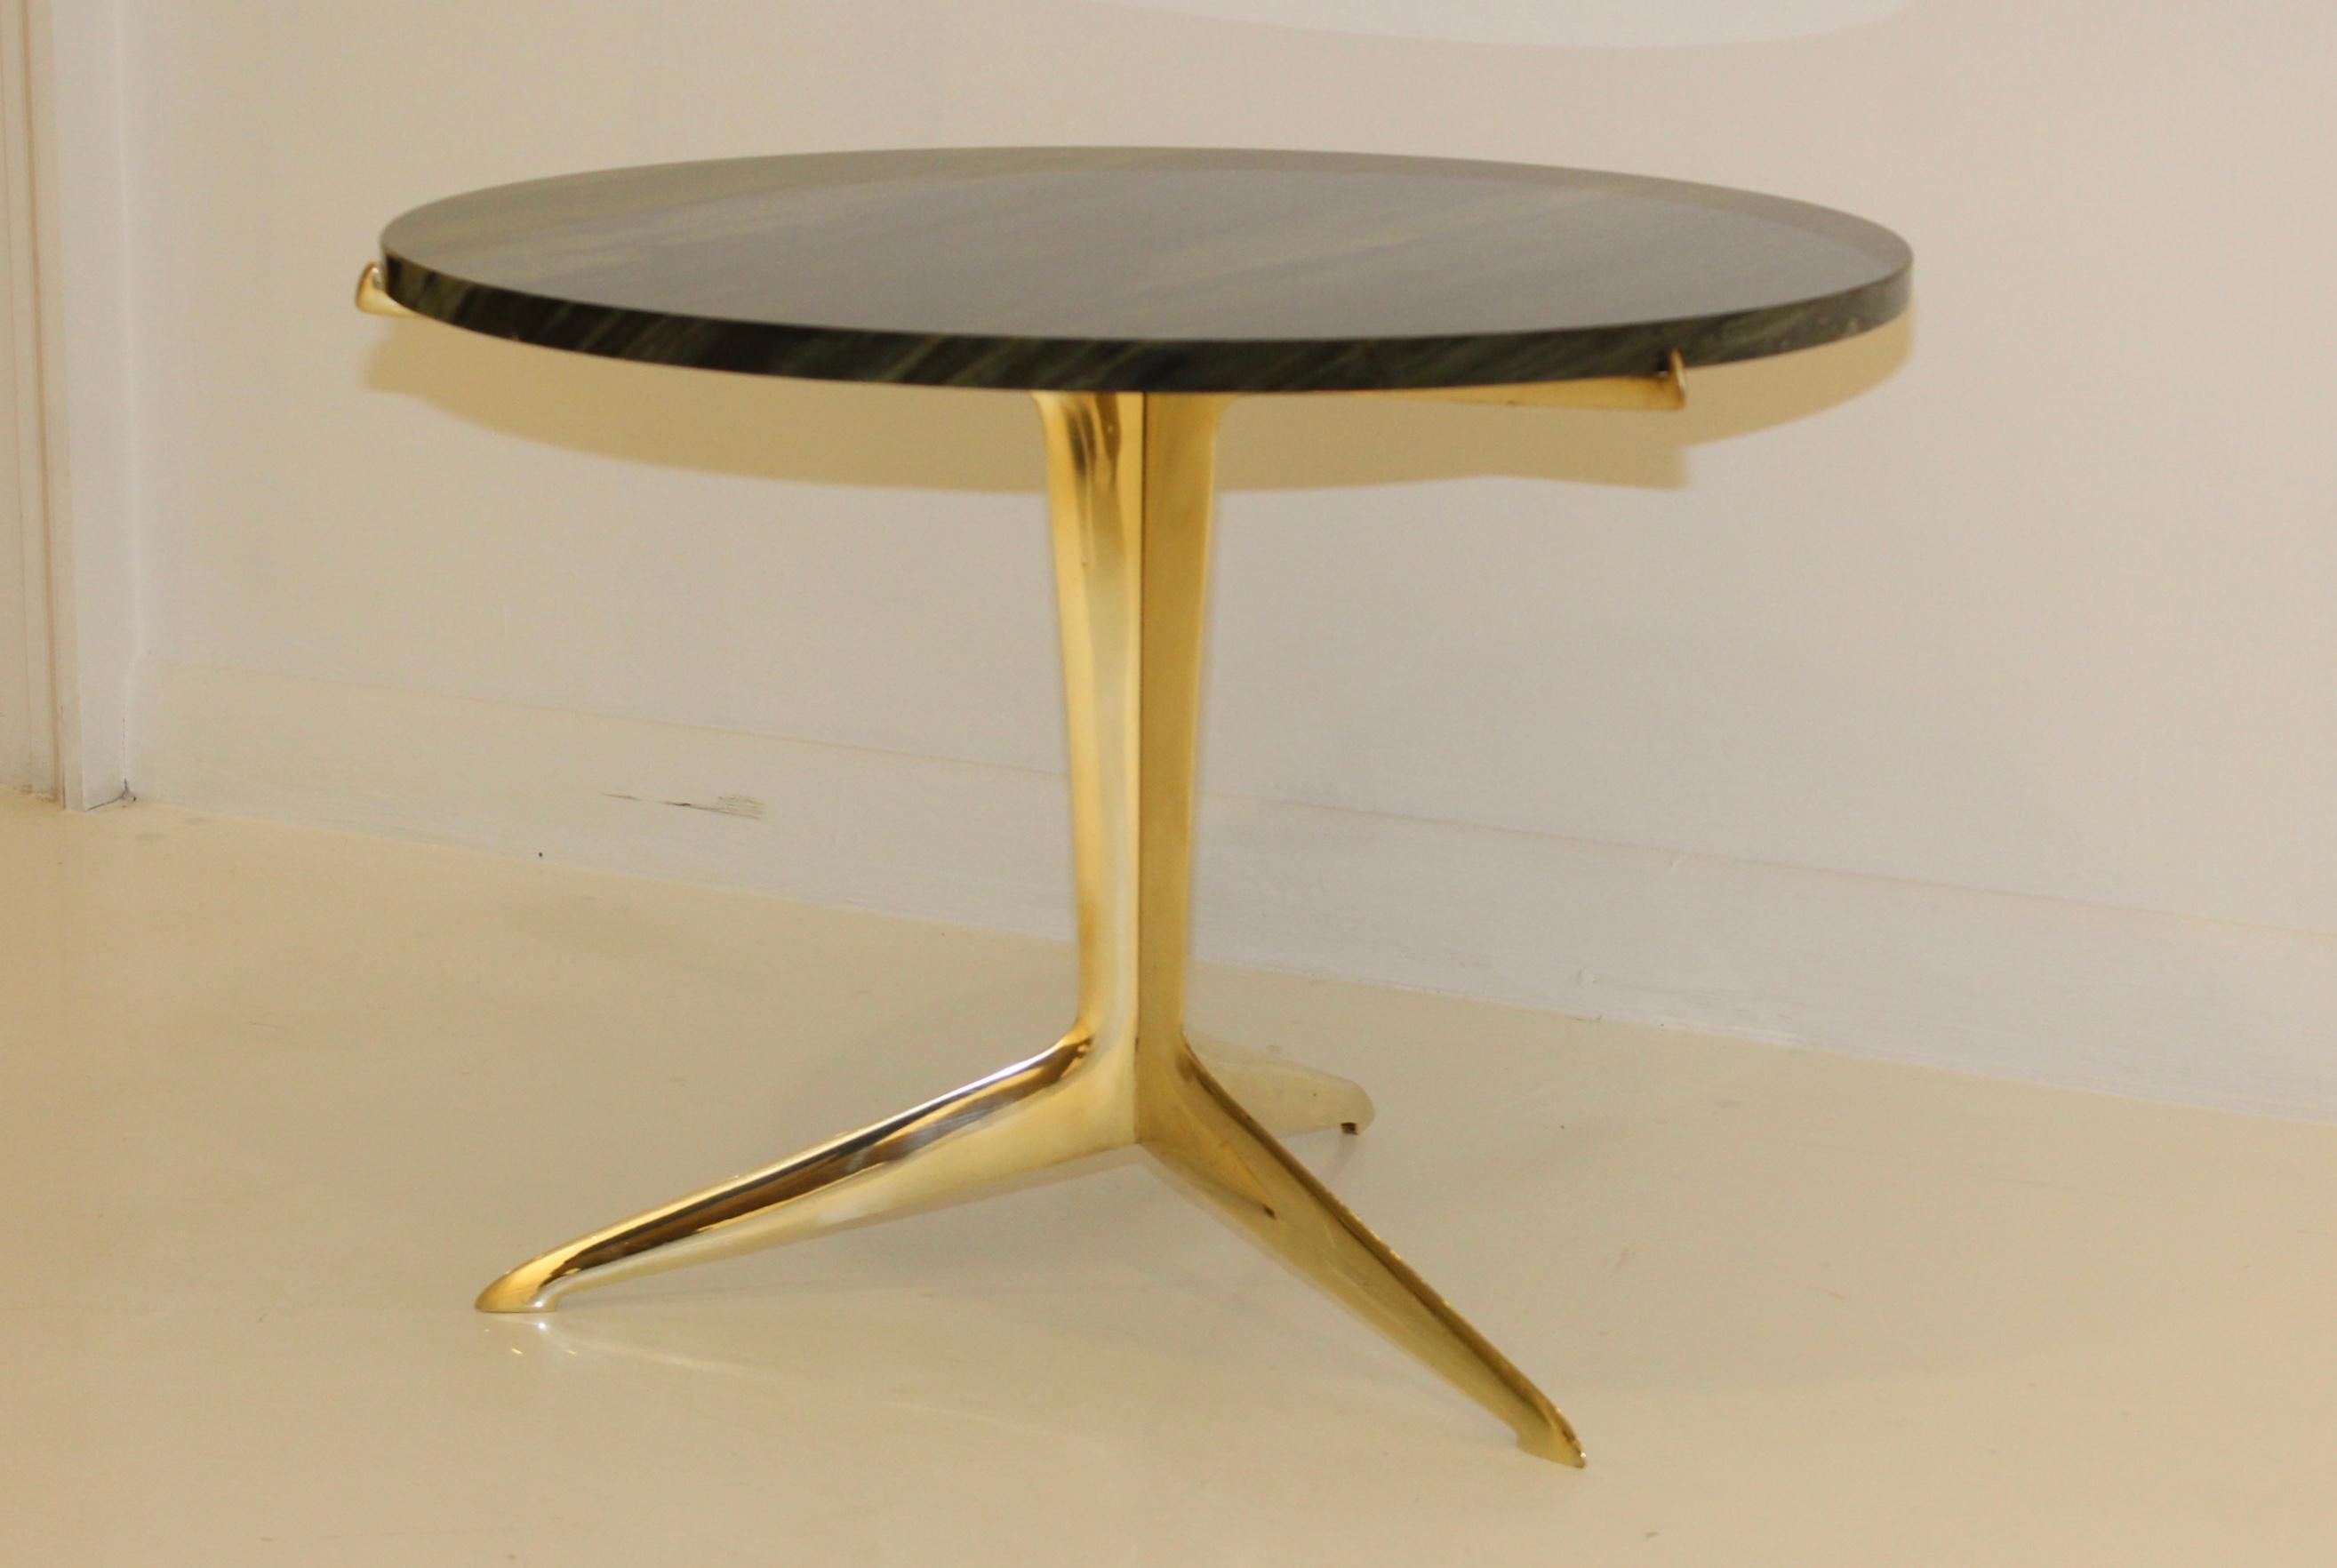 Modernist Italian solid brass with rare marble top tripod side table, number 5 of a limited edition of 6.